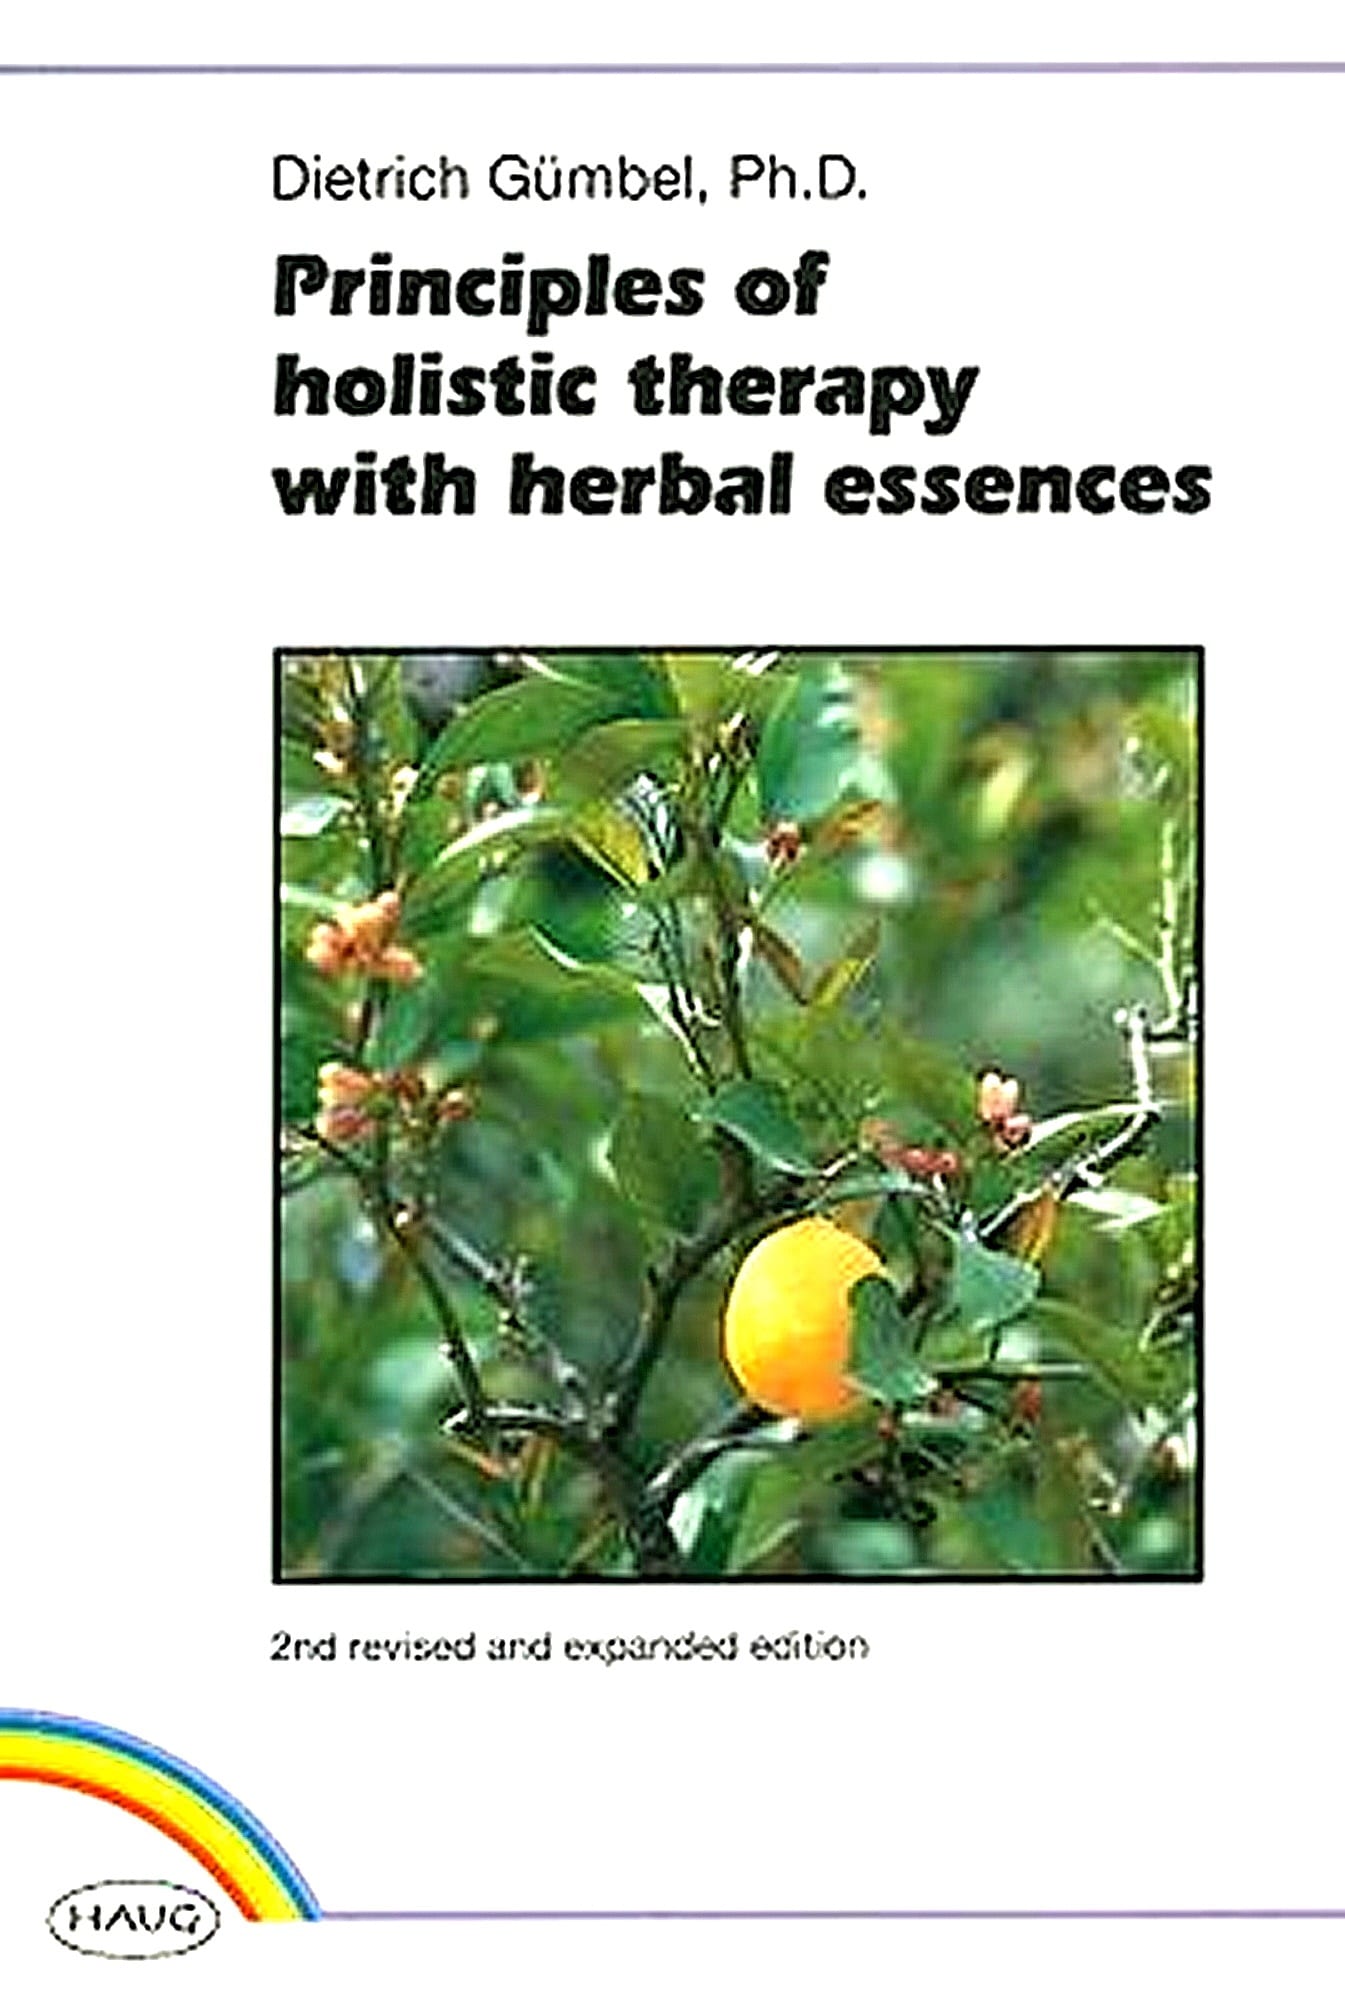 Principles of Holistic Therapy with Herbal Essences - Dietrich Gumbel, Ph.D.